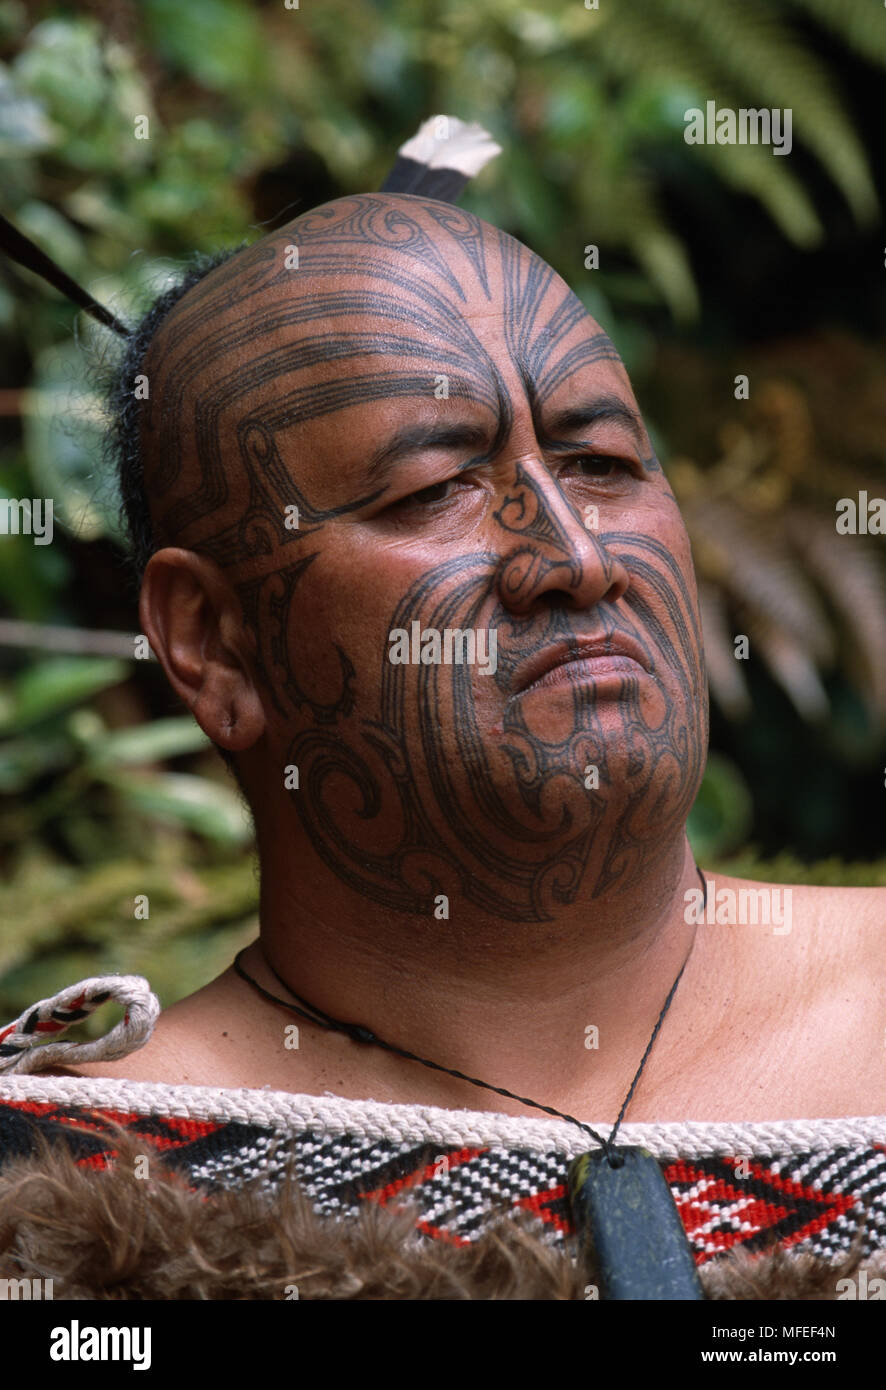 Apple iPhone face recognition doesnt work for man with moko kanohi  NZ  Herald